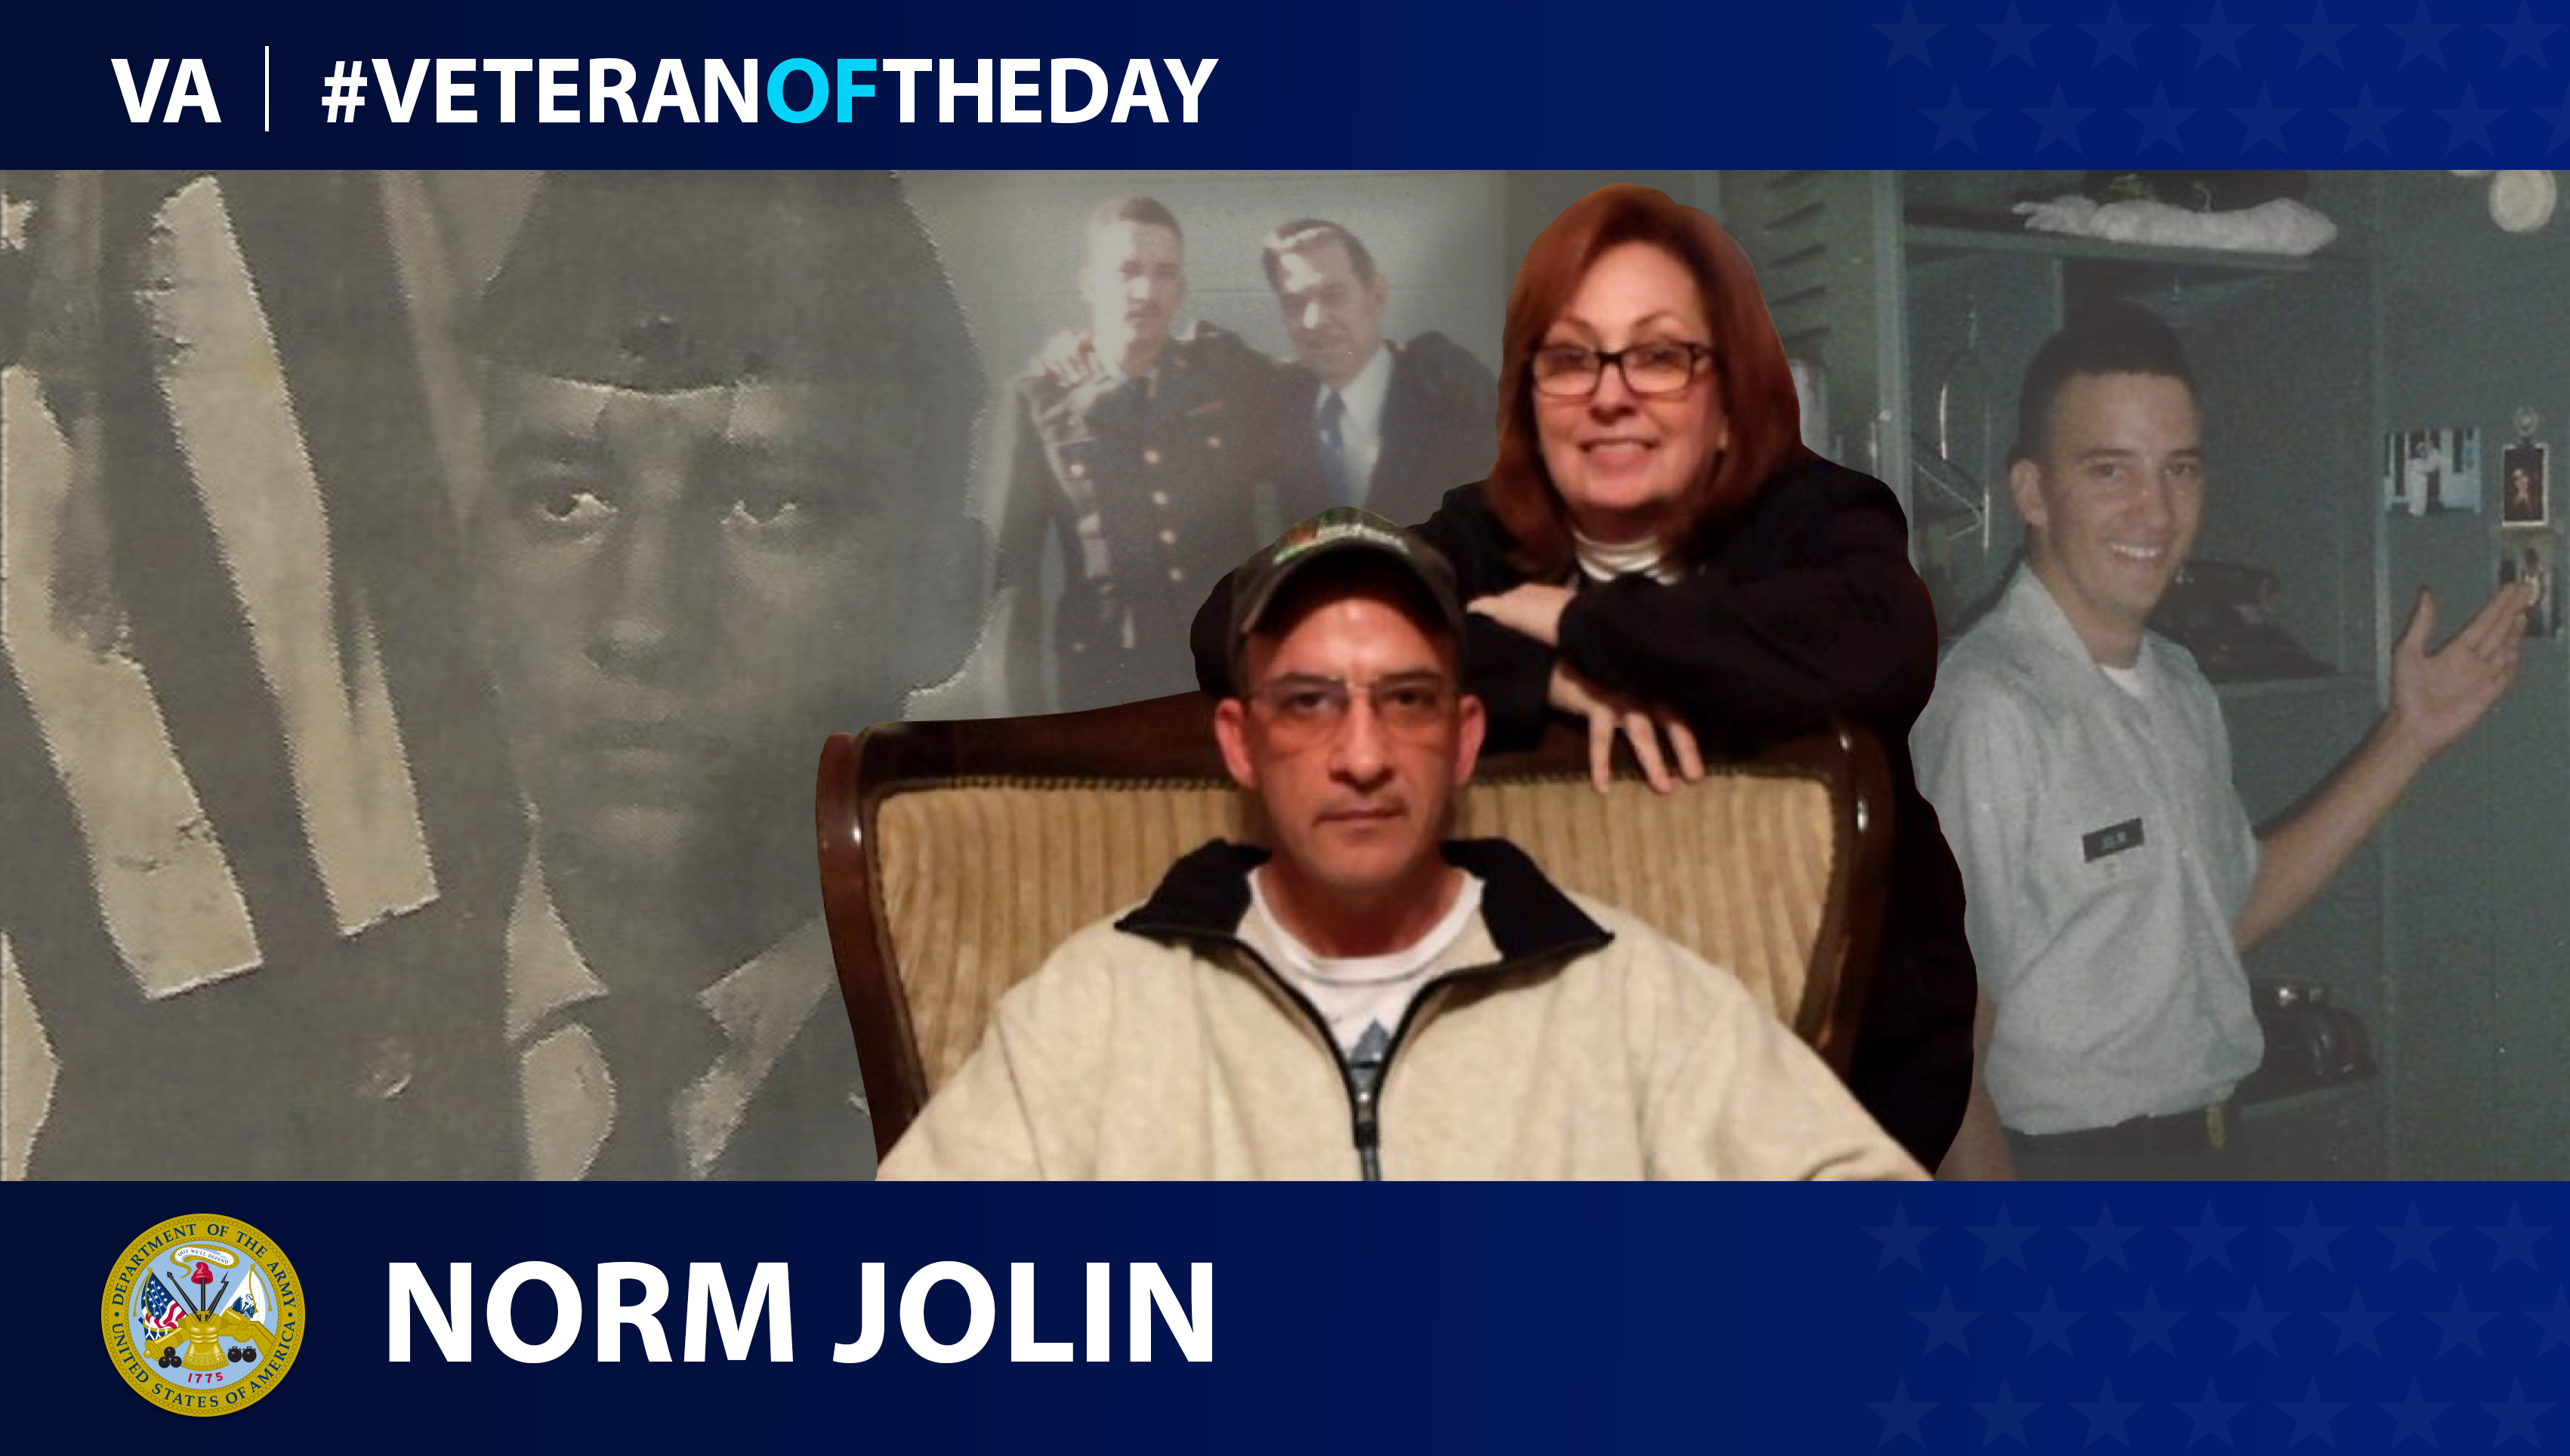 Army Veteran Norman W. Jolin is today's Veteran of the Day.